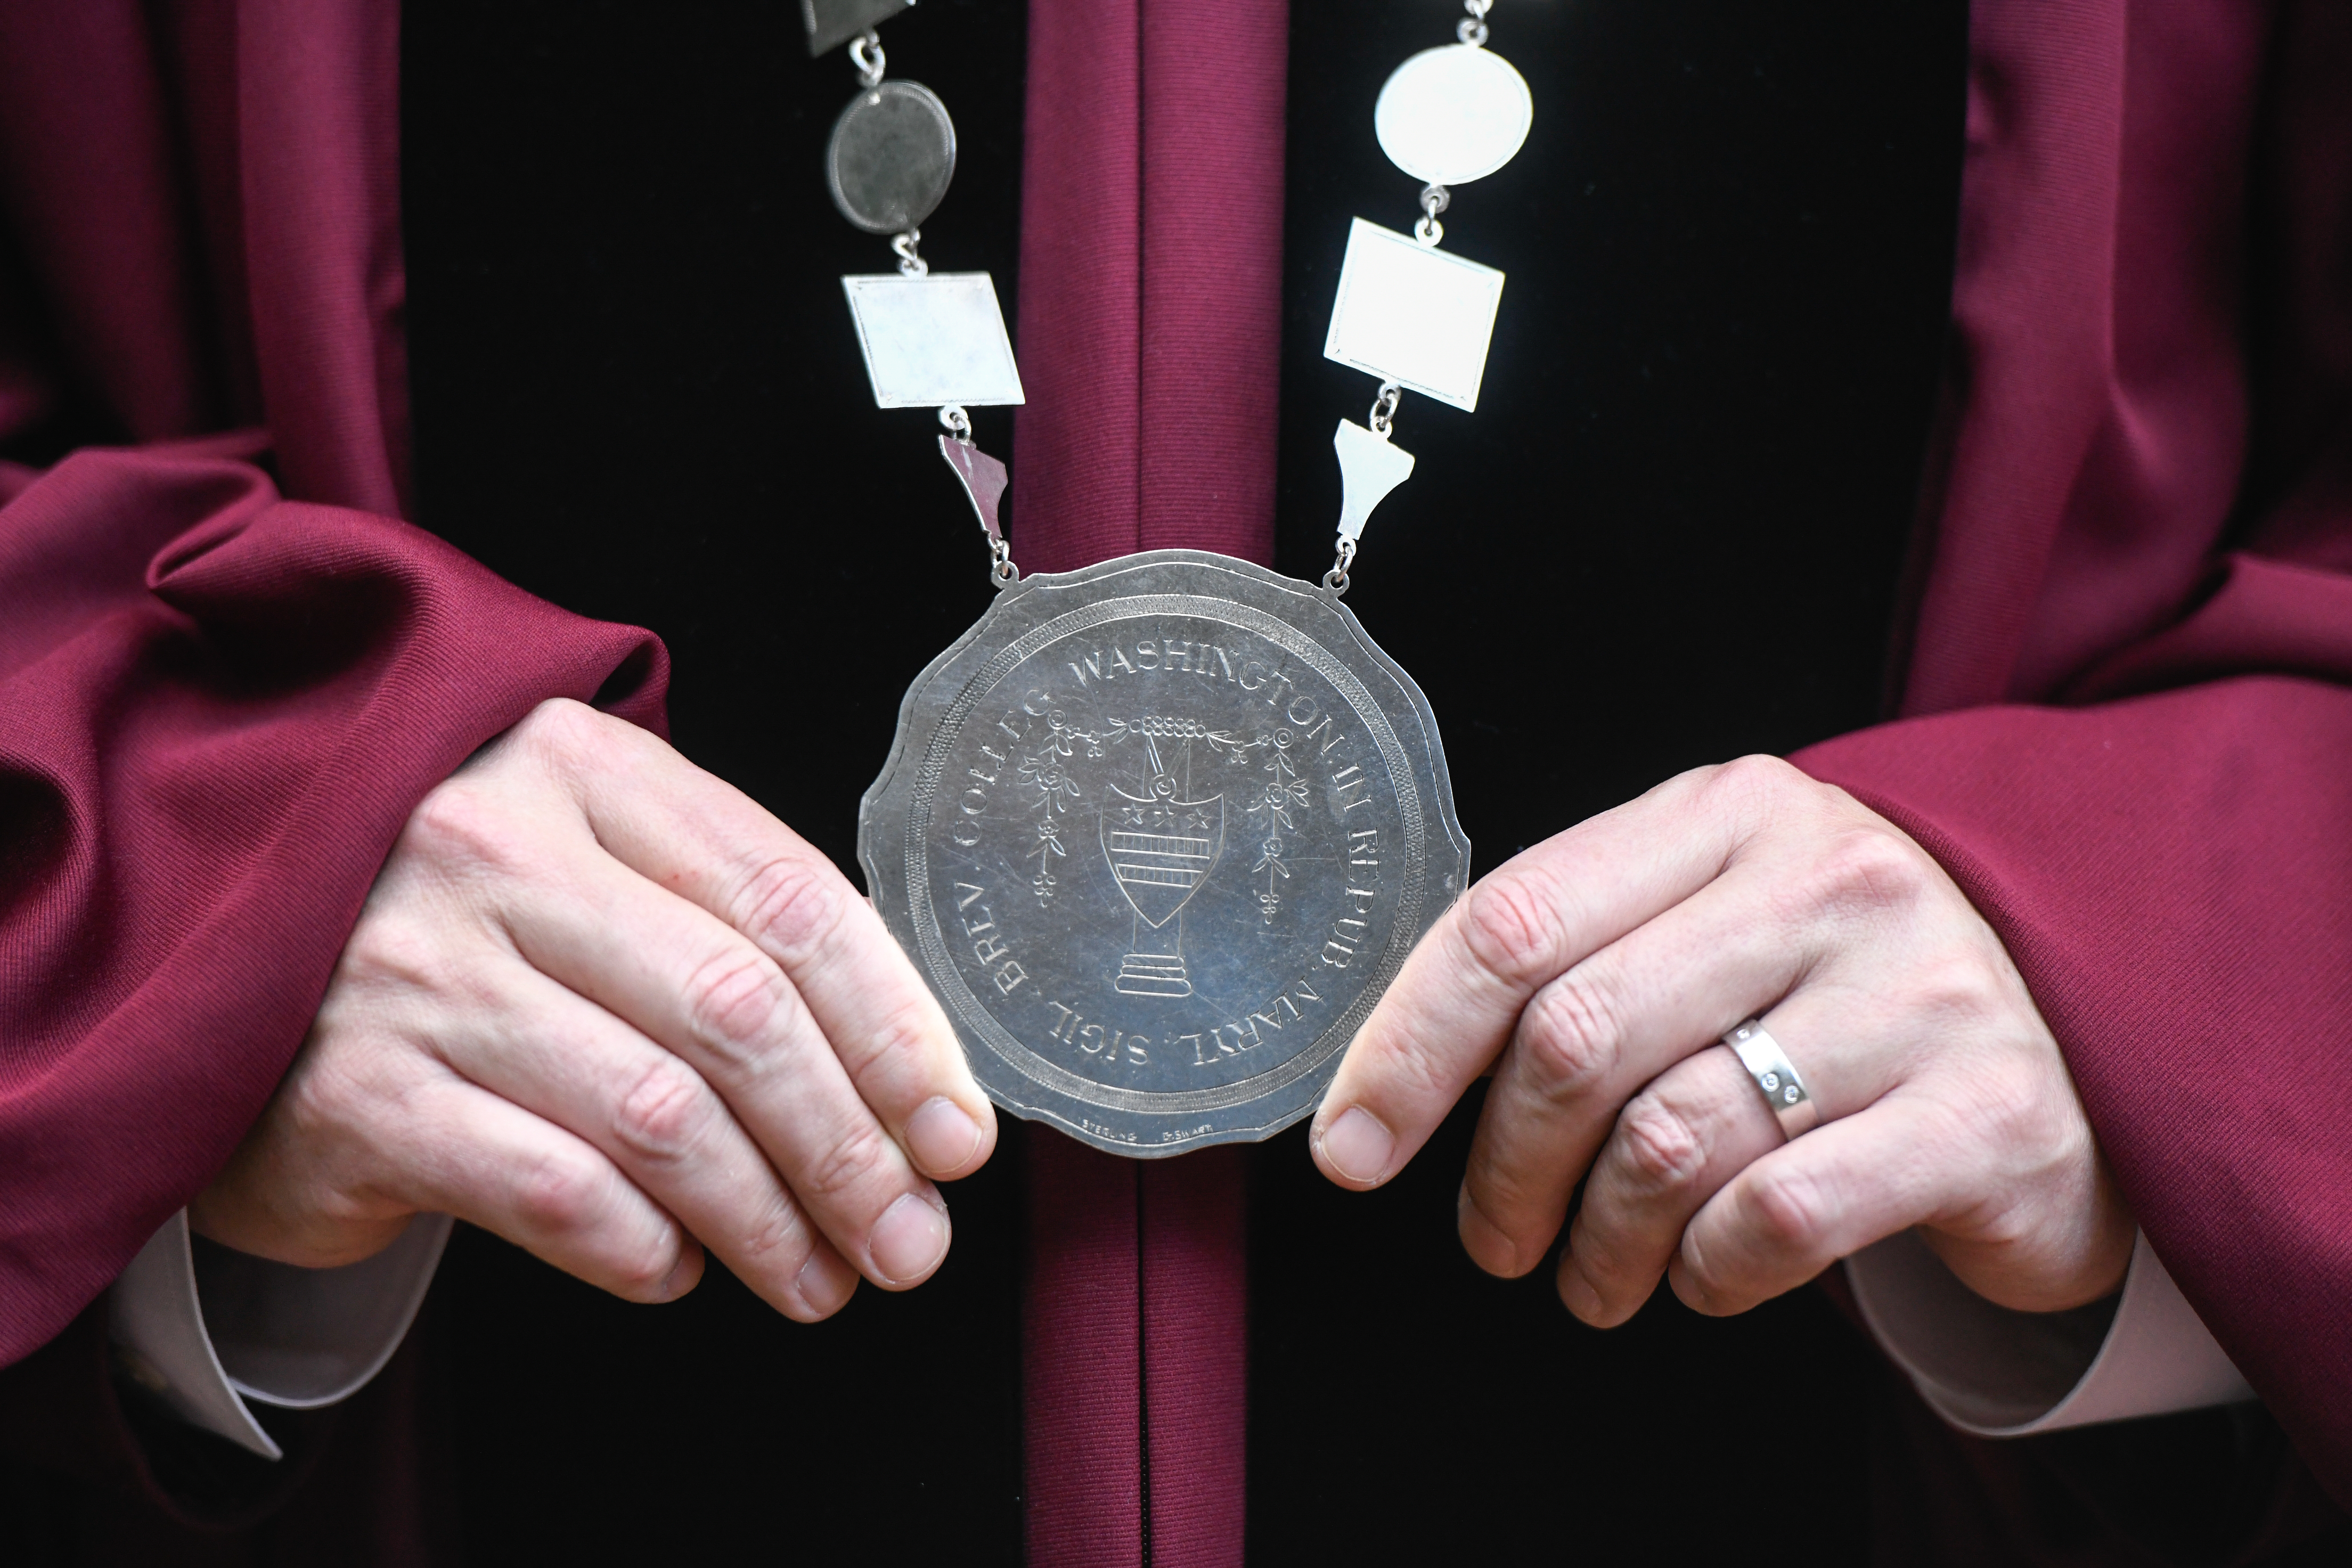 The President's Medallion and Chain worn by President Sosulski